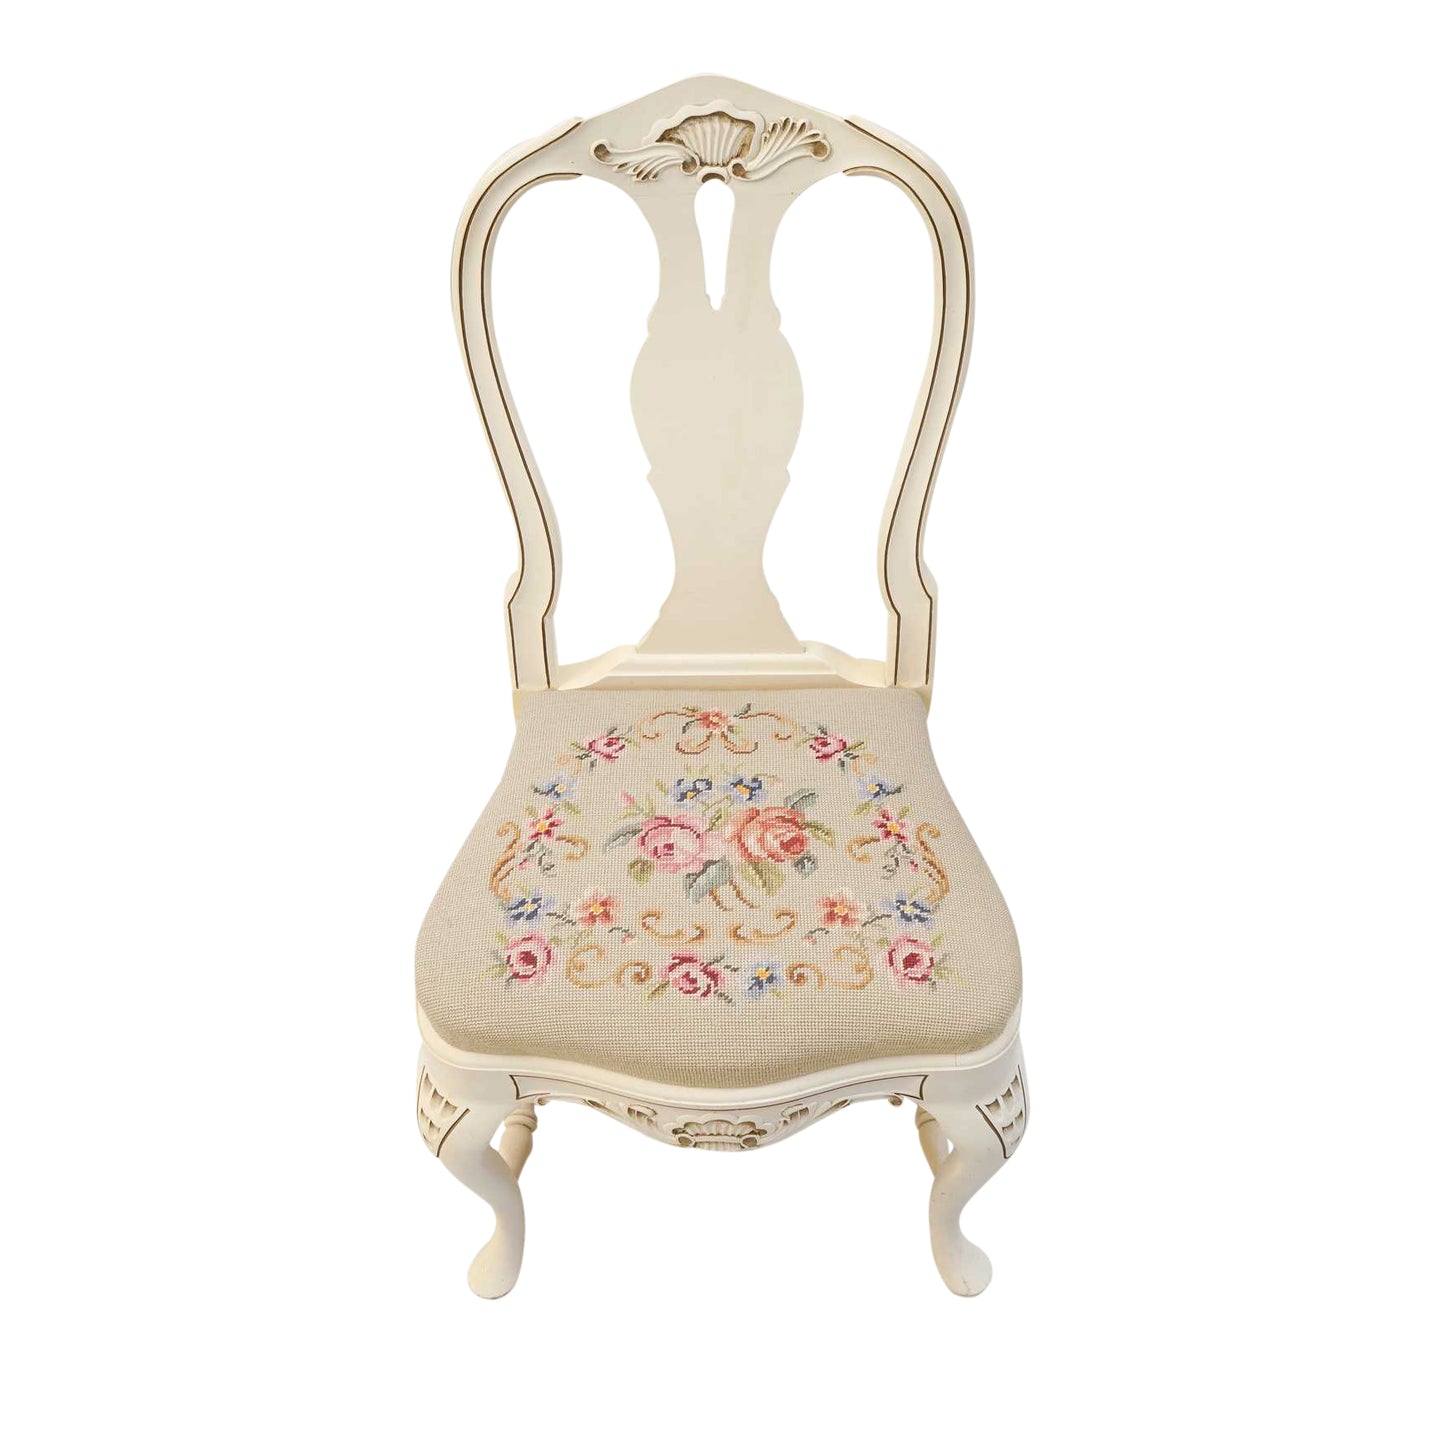 1930s Vintage Swedish Hand Painted Rococo Chair with tapestry seat